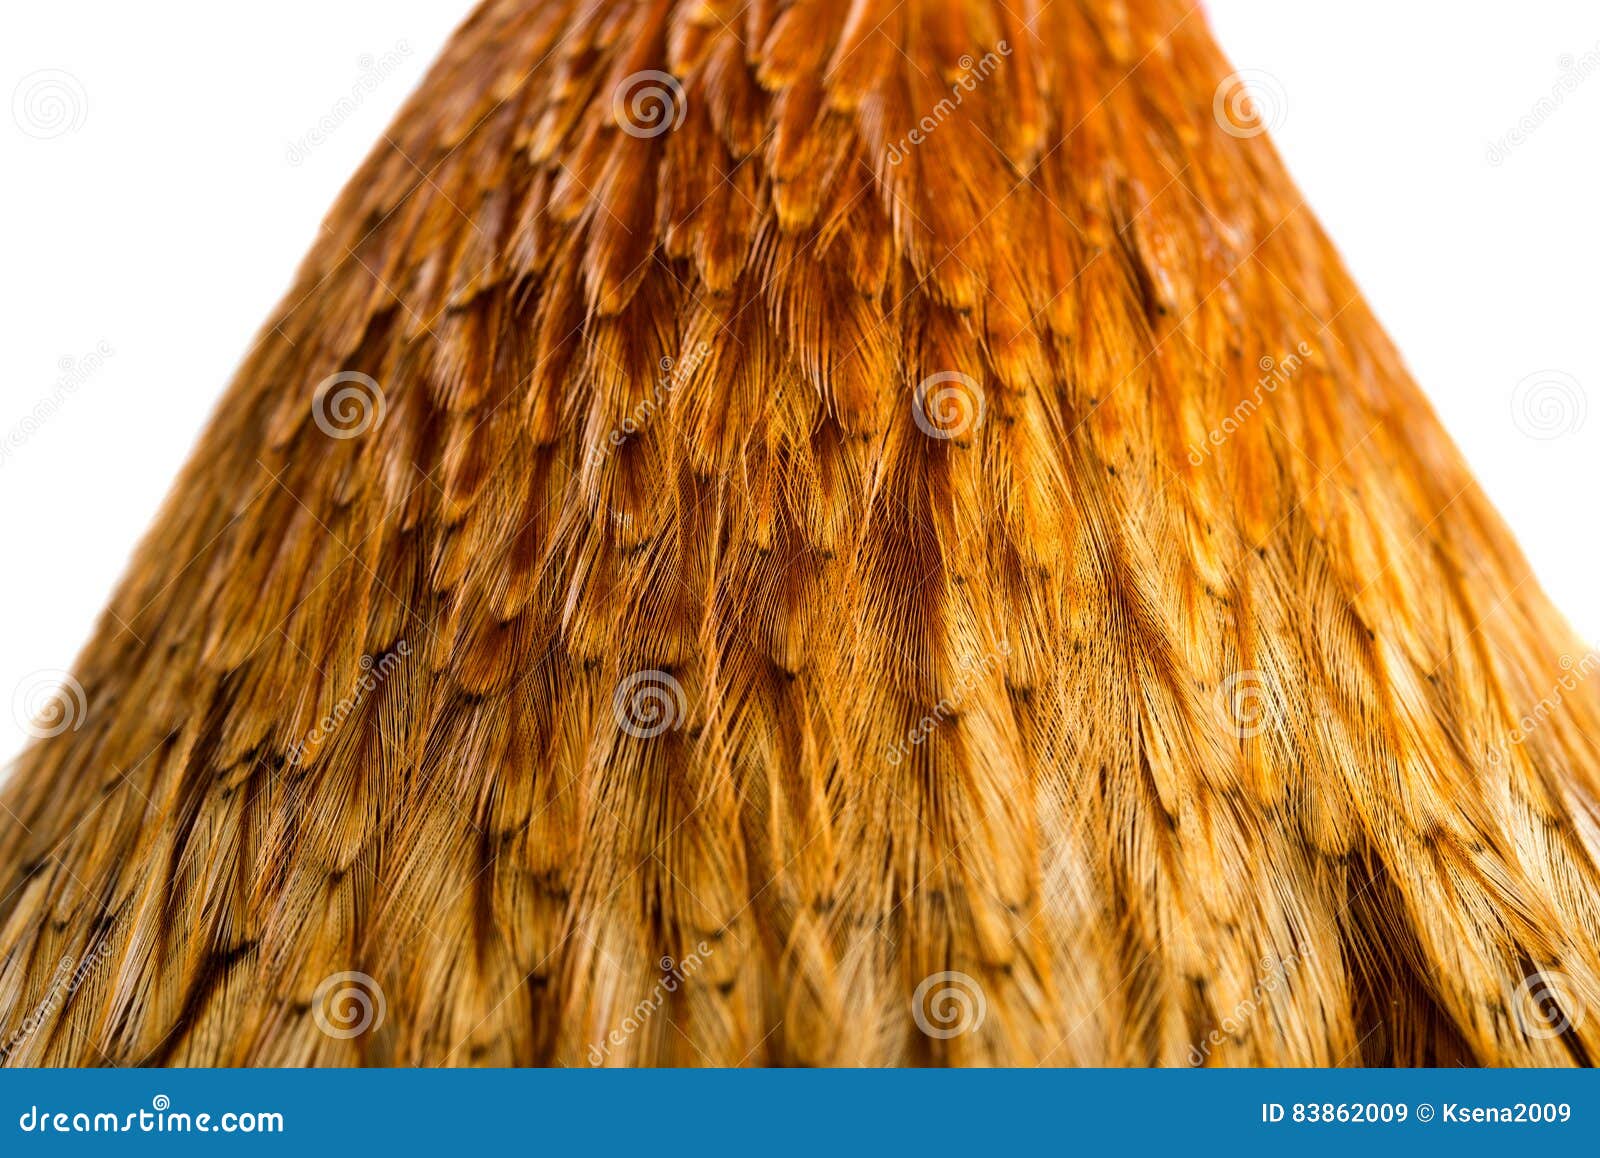 Rooster Tail Feathers in Close-up Shot · Free Stock Photo